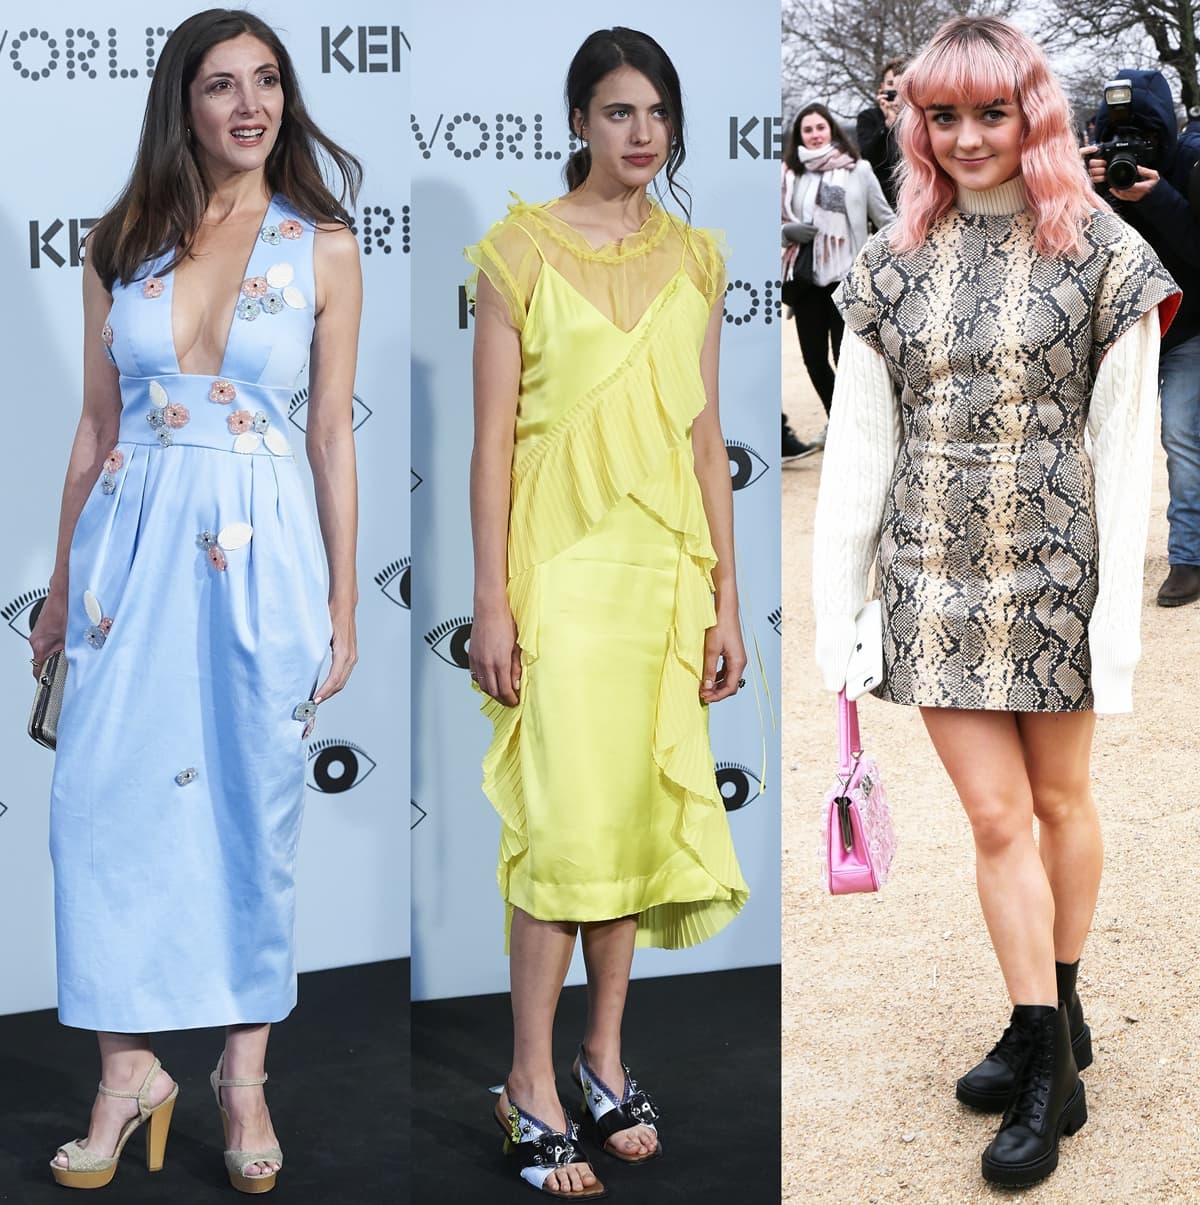 María Laura Espido Freire, Margaret Qualley, and Maisie Williams wearing dresses and shoes by Kenzo